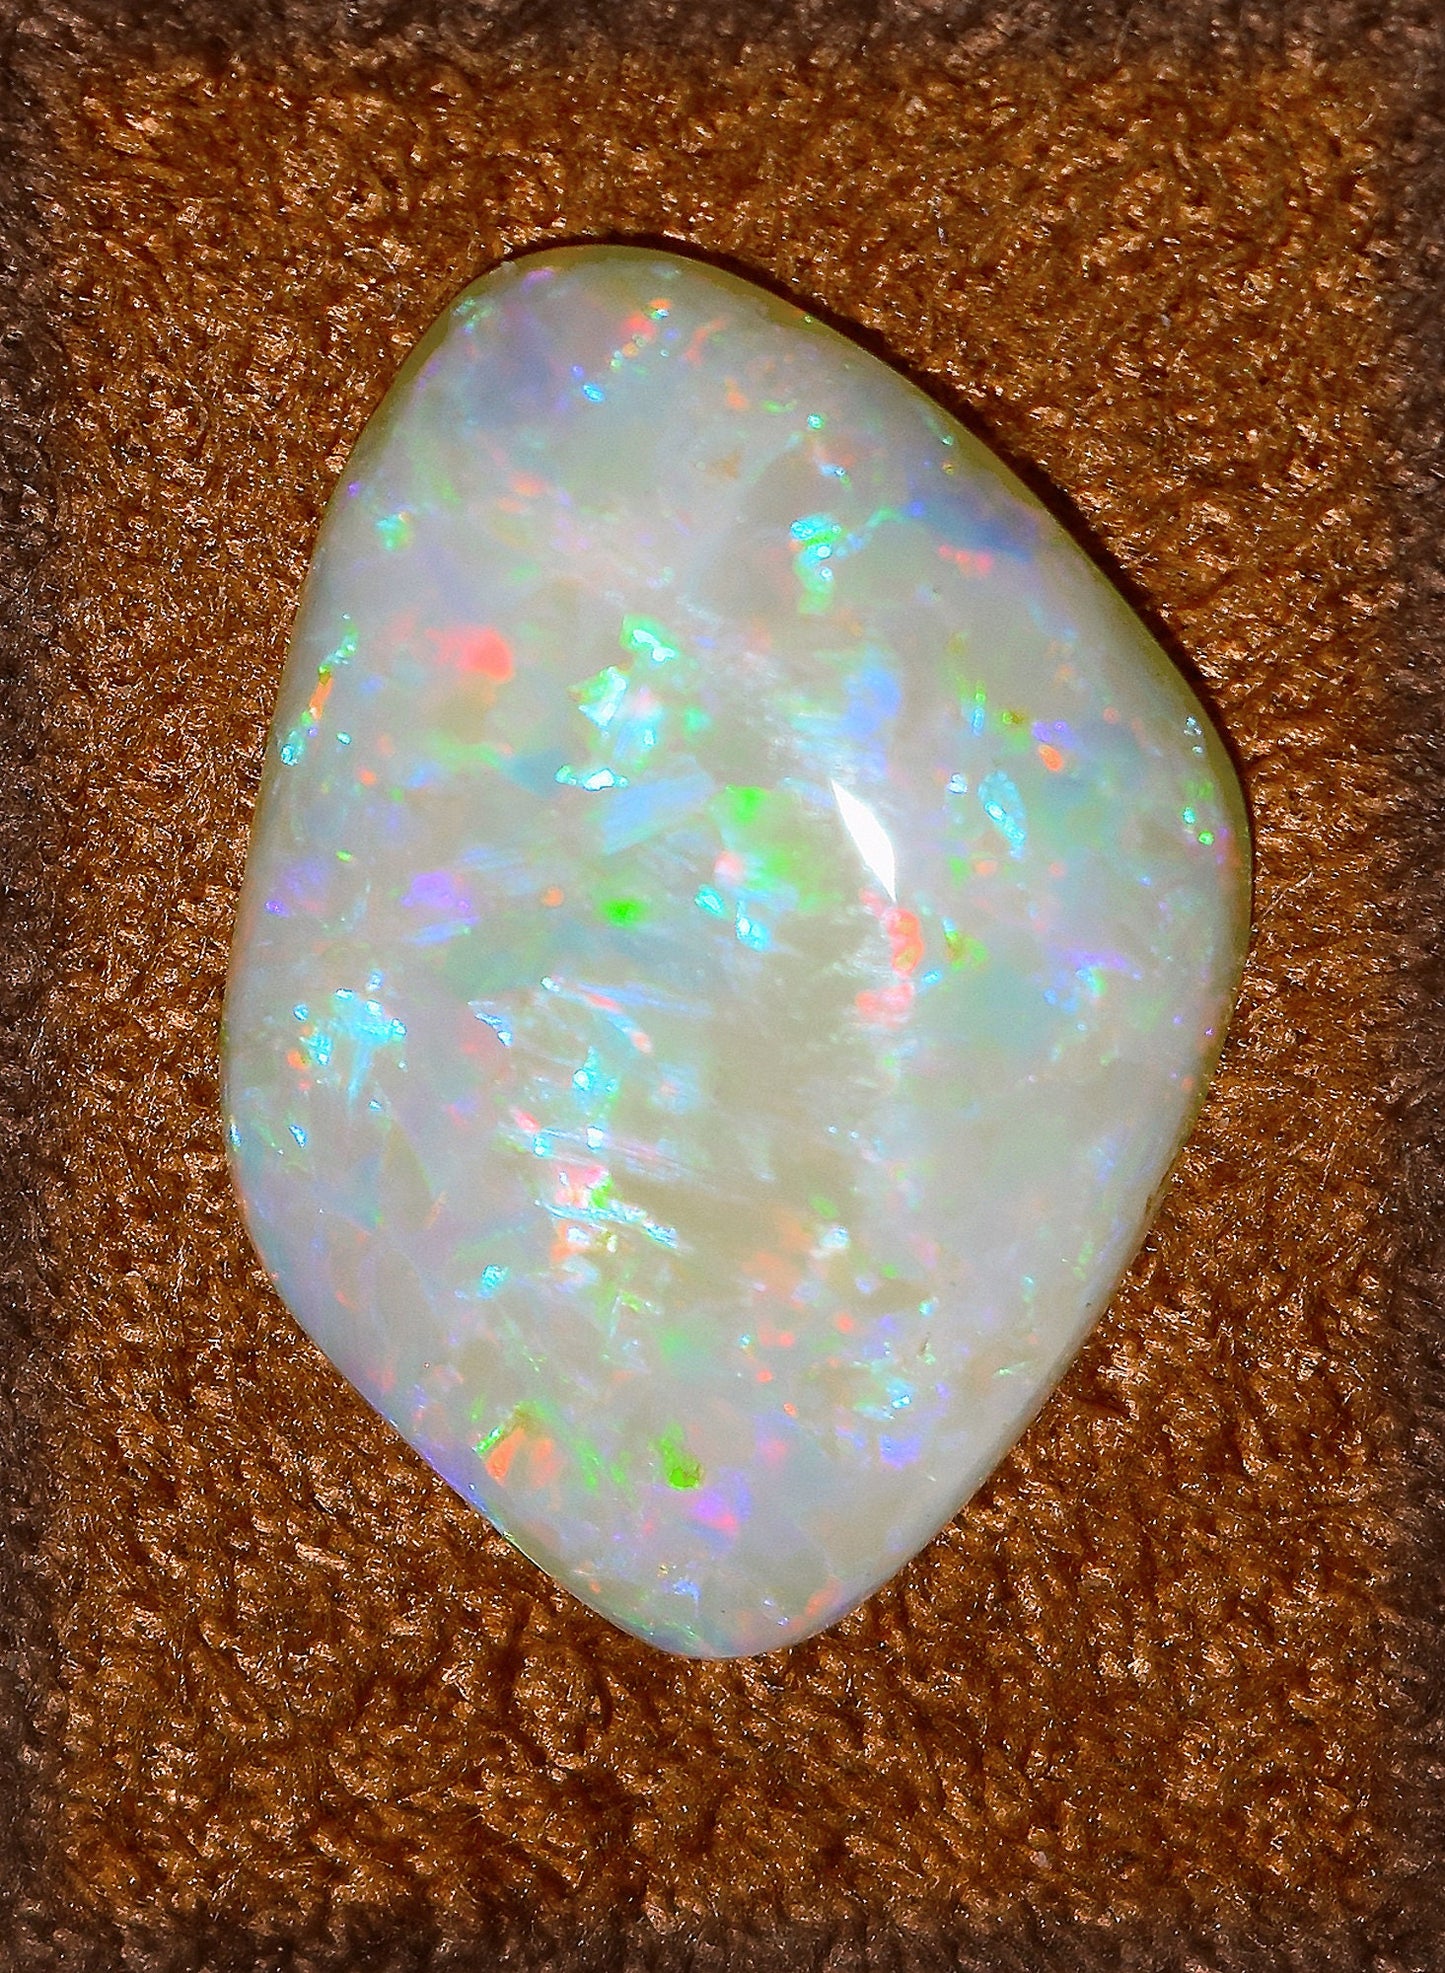 KAZOWIE! Wanna be seen from across the room? This Opal should do the trick!